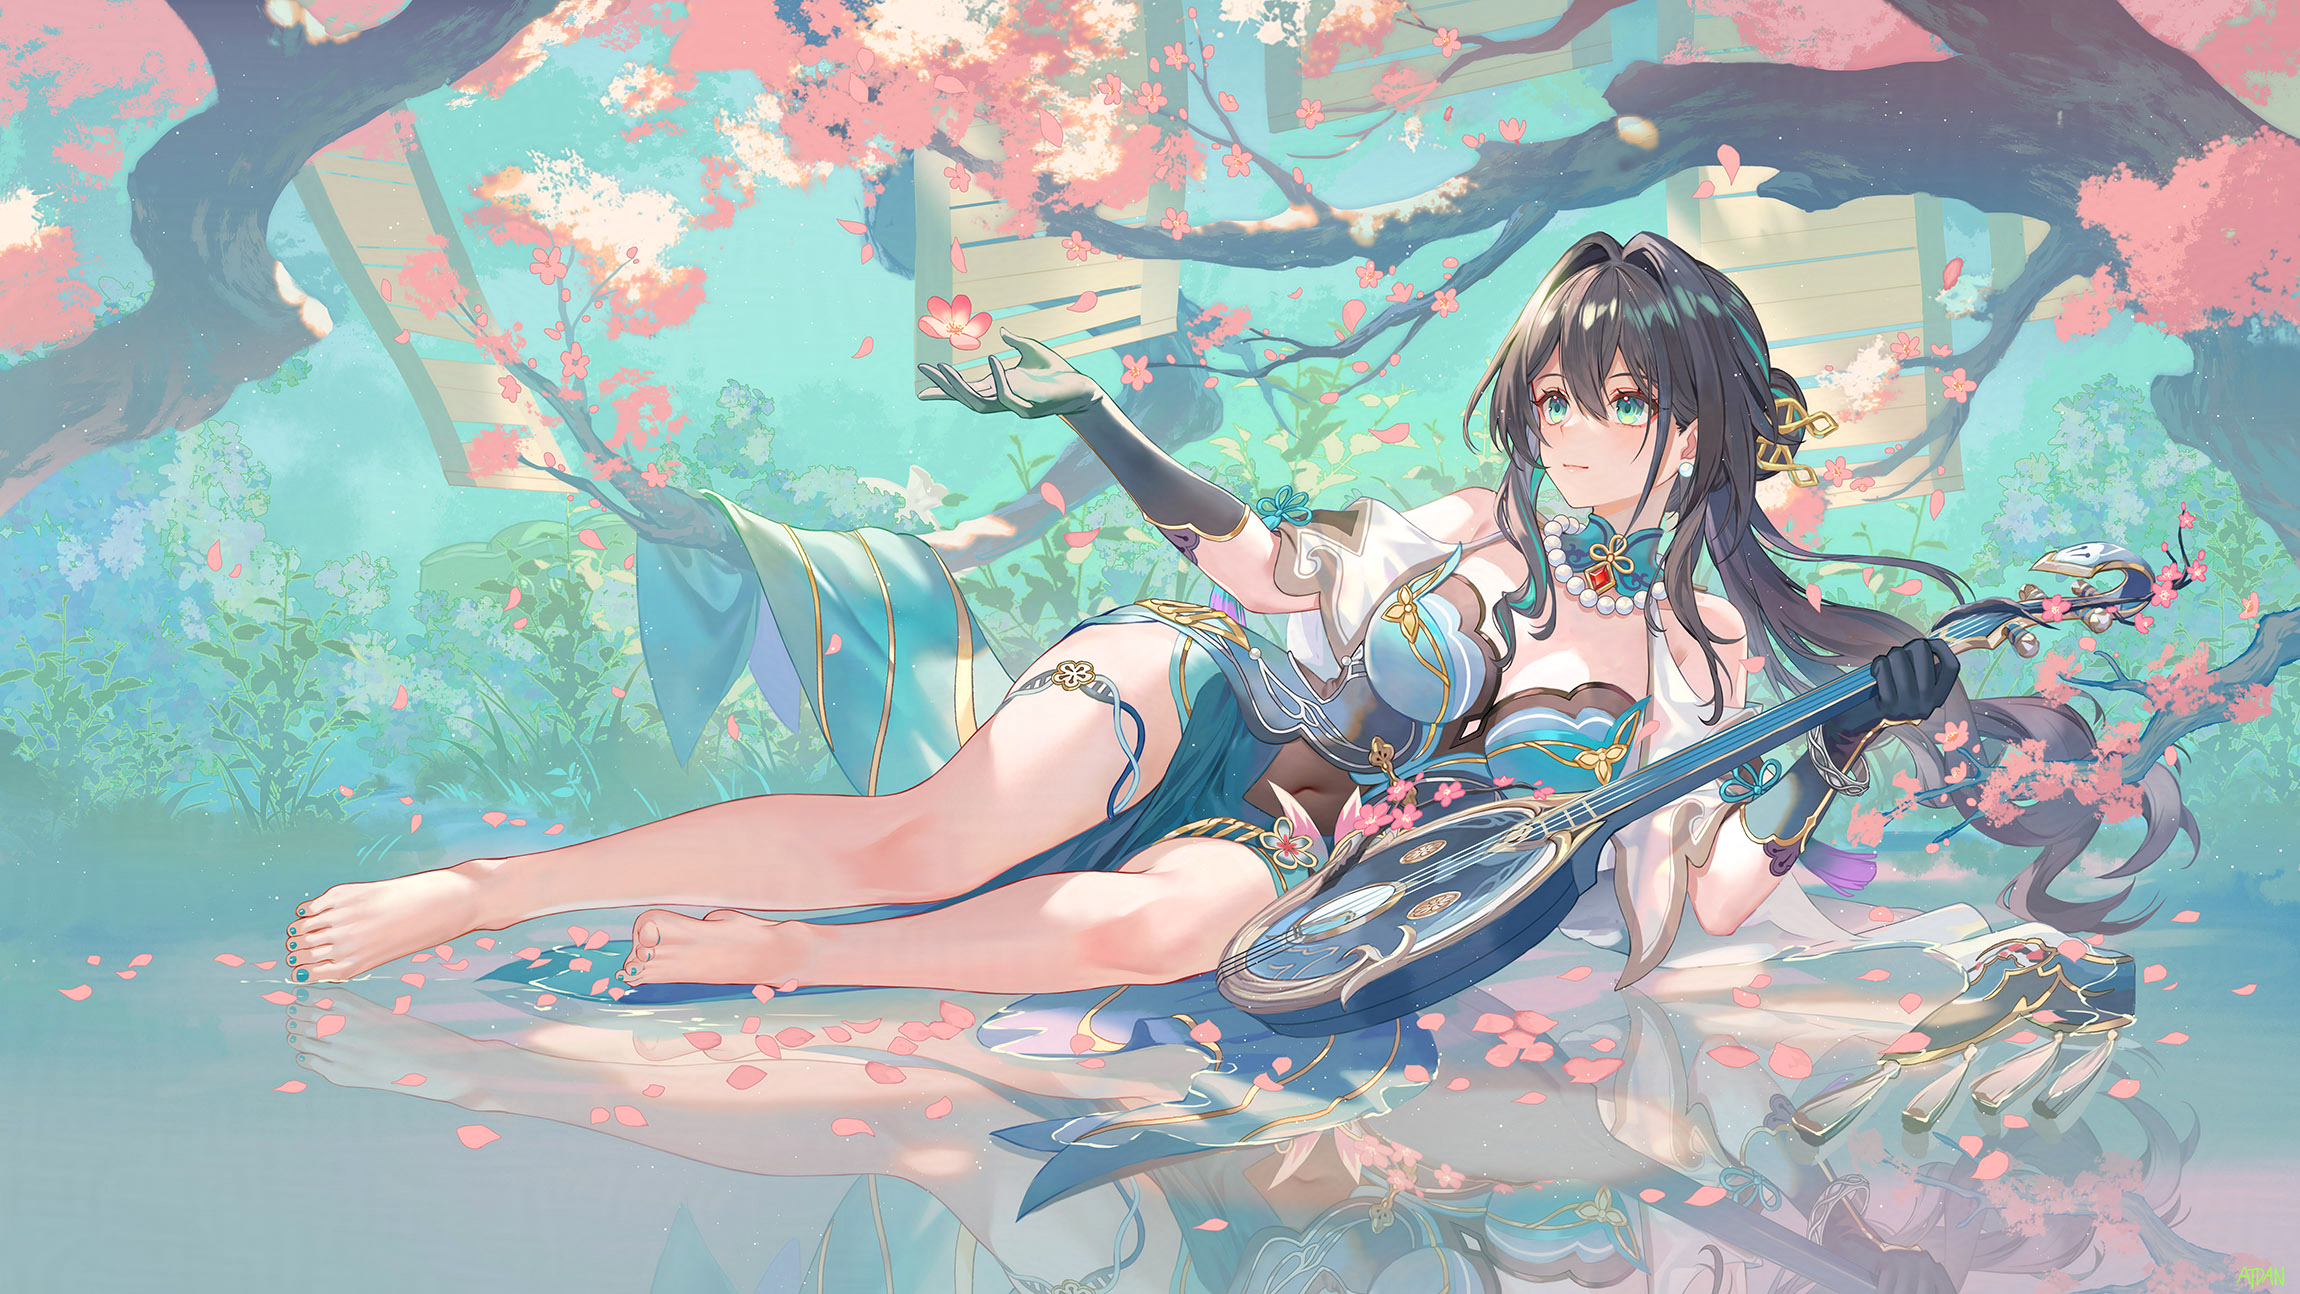 Anime 2300x1294 Honkai: Star Rail artwork Ruan Mei (Honkai: Star Rail) anime anime girls black hair green eyes big boobs cleavage musical instrument earring necklace pearl necklace belly belly button water petals trees barefoot Plum blossom reflection Atdan hair between eyes long hair